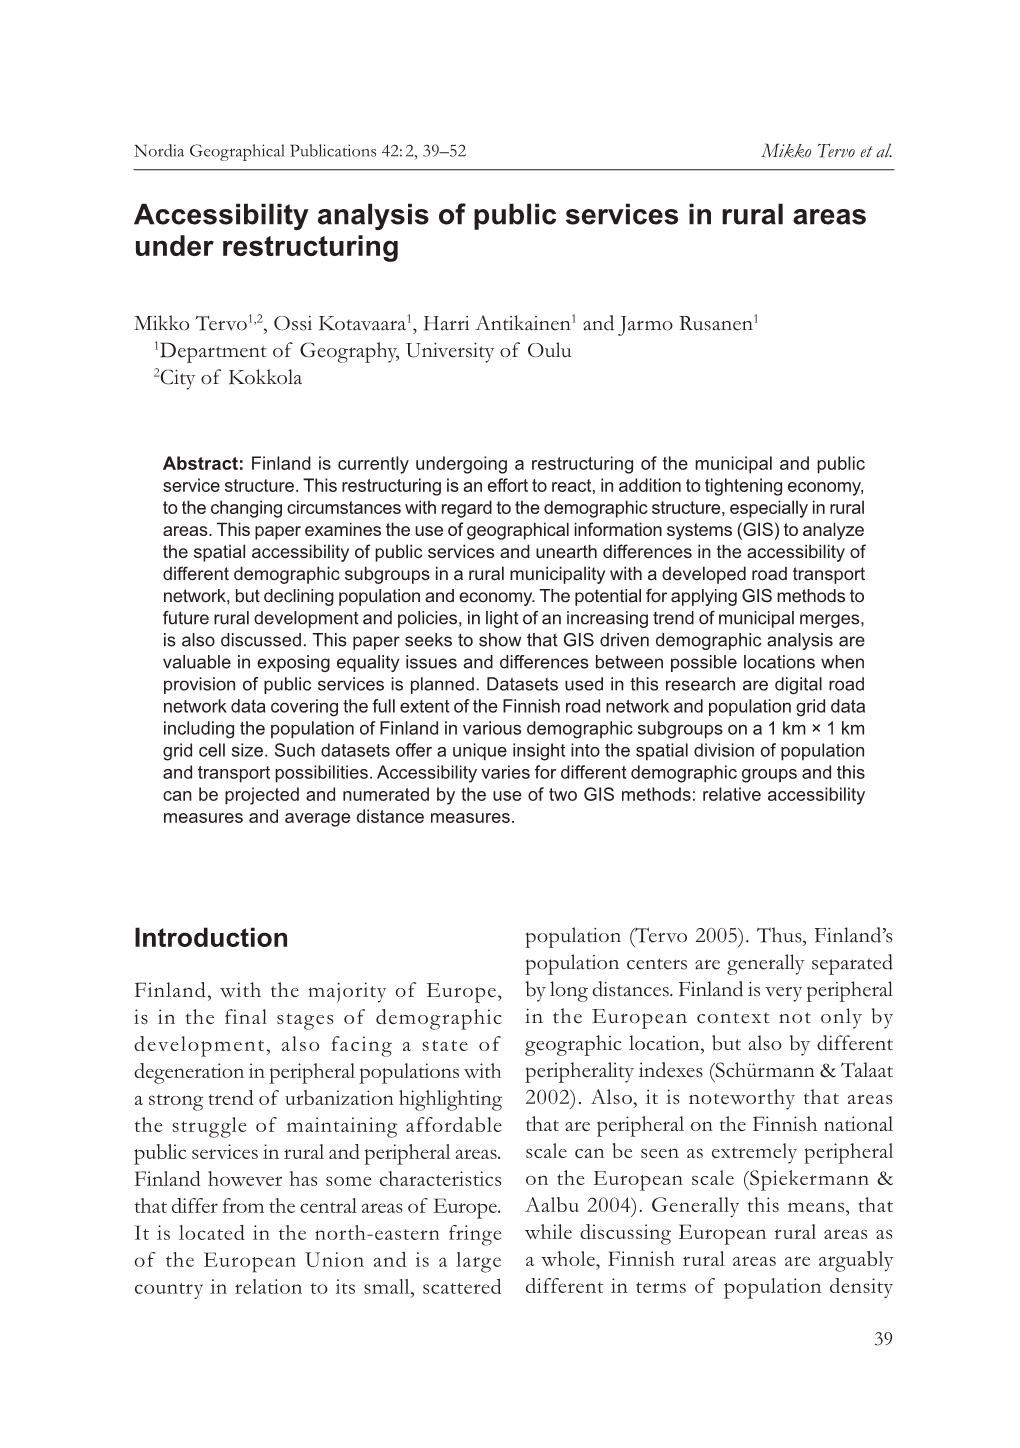 Accessibility Analysis of Public Services in Rural Areas Under Restructuring